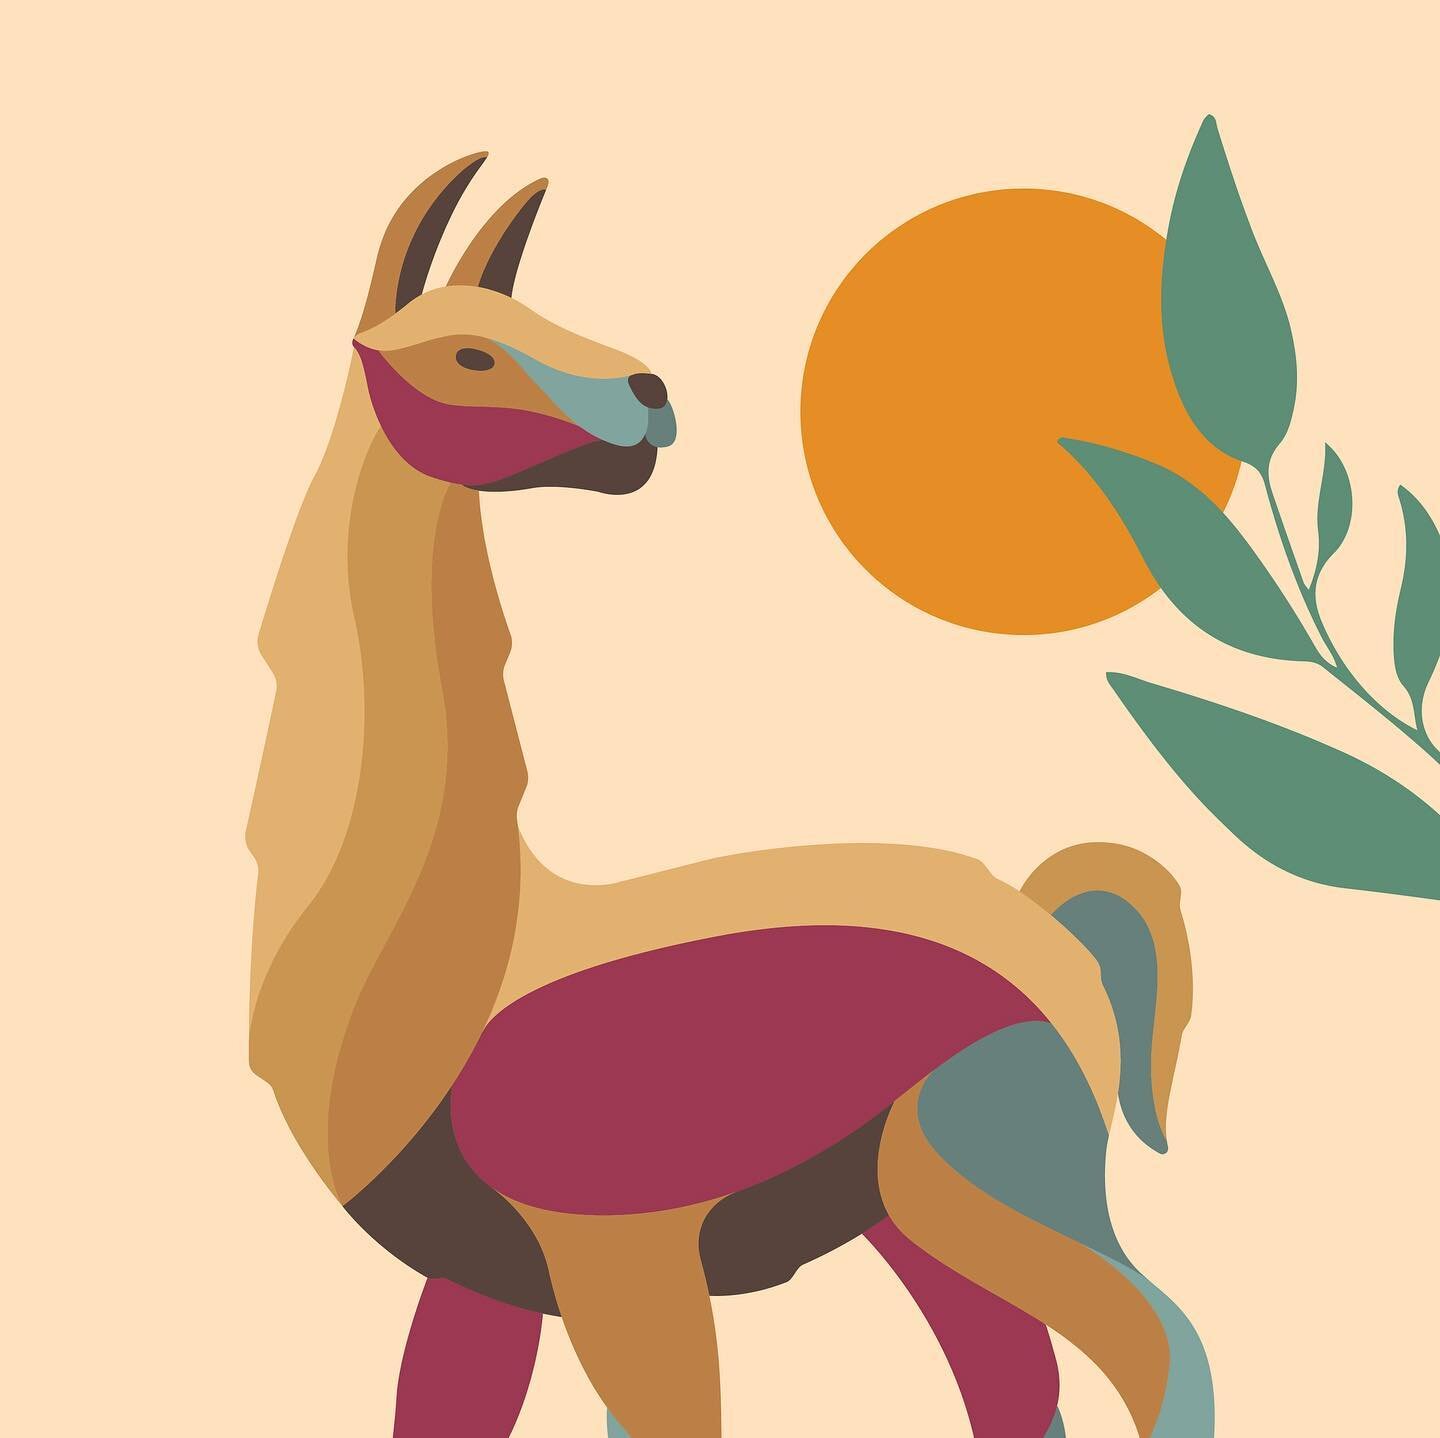 Pachamama Coffee Label Art Project
Peru | Llama 

We asked Vladimir, @pachamama_coffee&rsquo;s board representative from COCLA cooperative in Peru, what animal would best represent their coffee. Without hesitation, he said the llama.

The llama was o